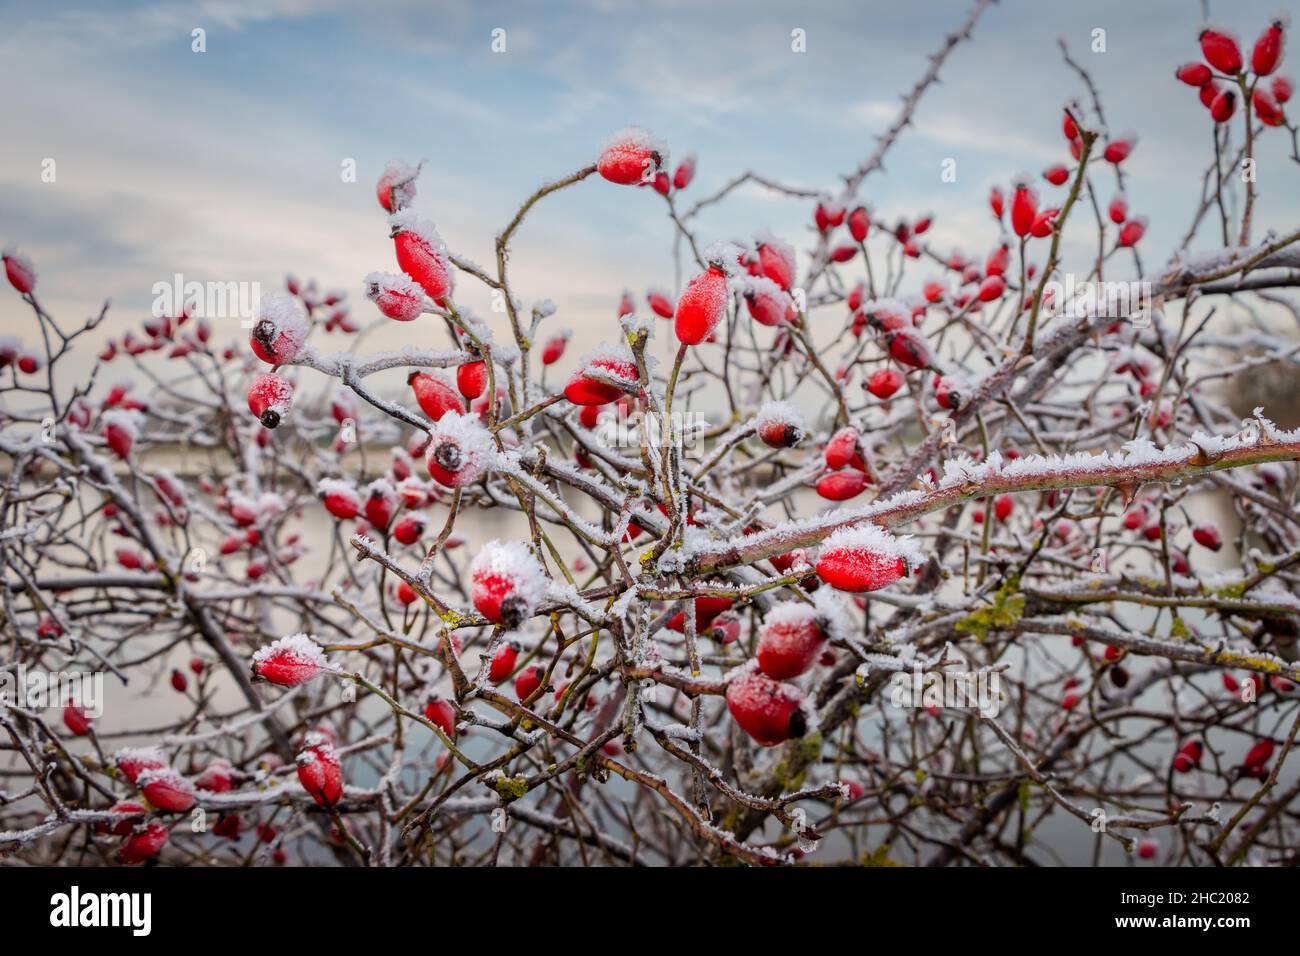 Rose hips the beautiful bright red berries covered with a layer of ice with beautiful ice crystals, in the month of December, Netherlands Stock Photo